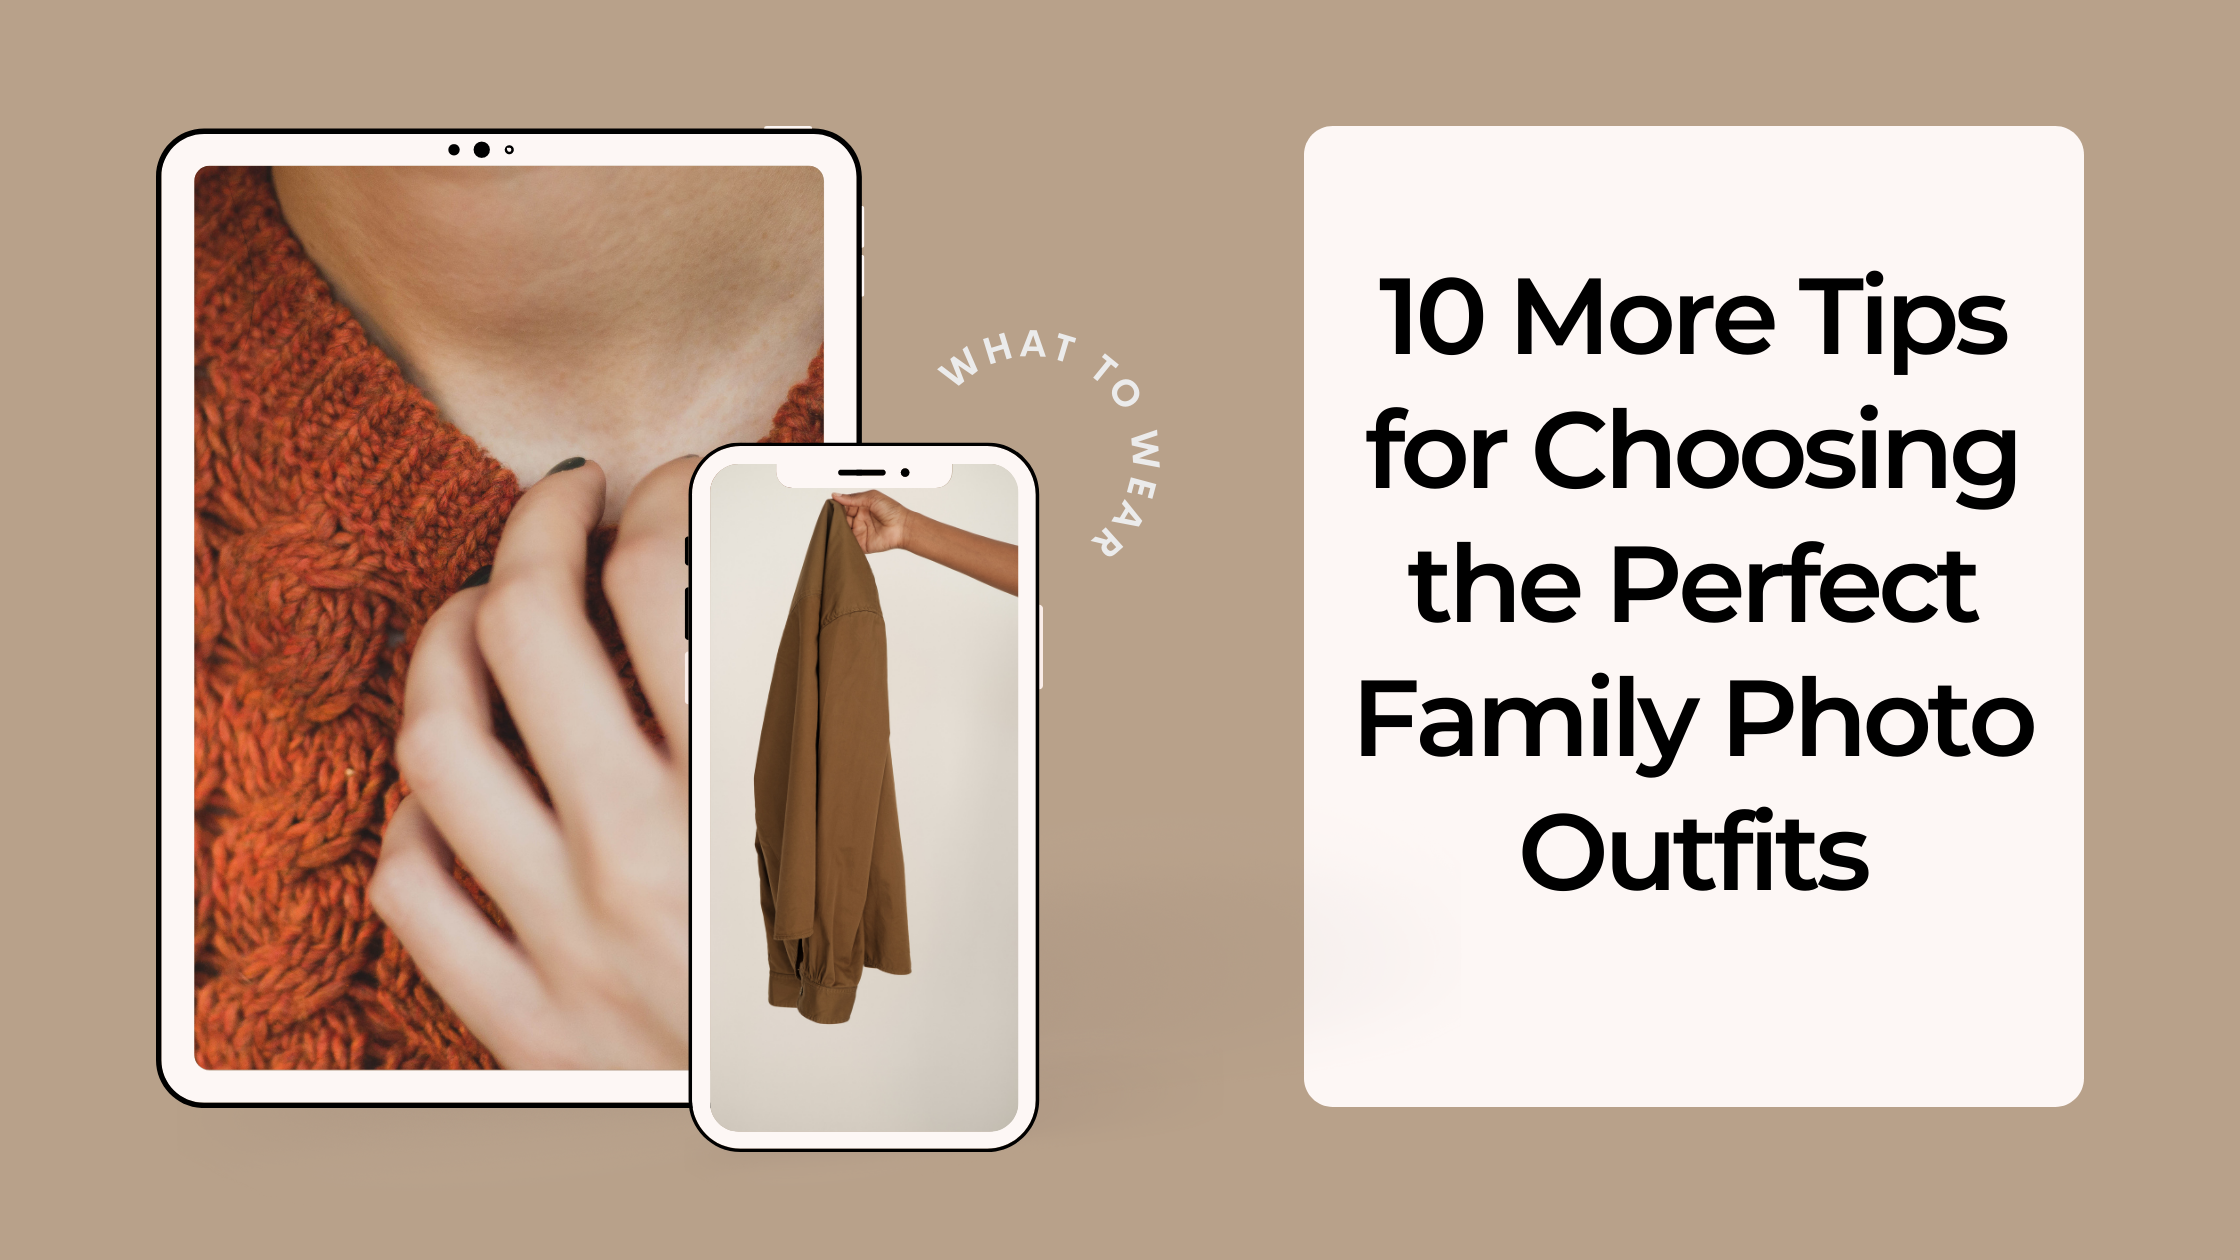 10 More Tips for Choosing the Perfect Family Photo Outfits